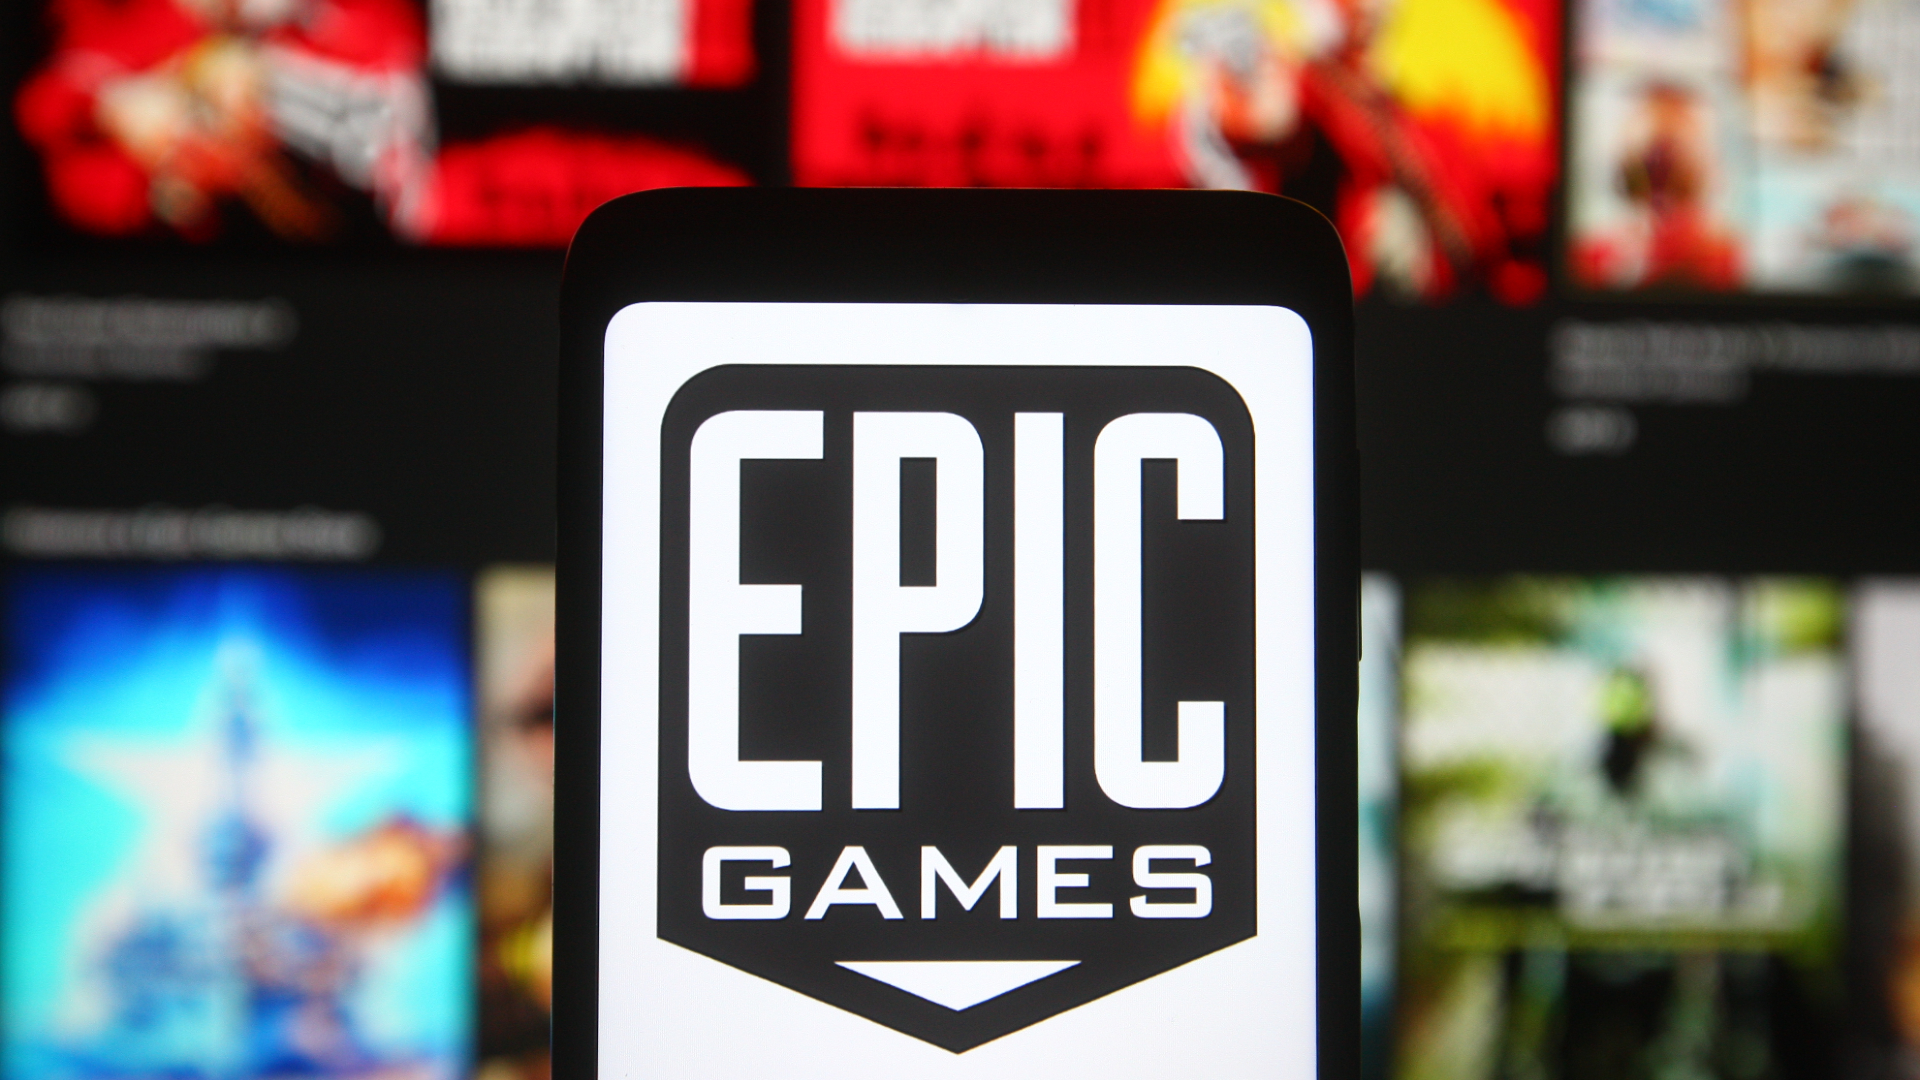 Epic says its PC game store now has more than 100 million users - The Verge